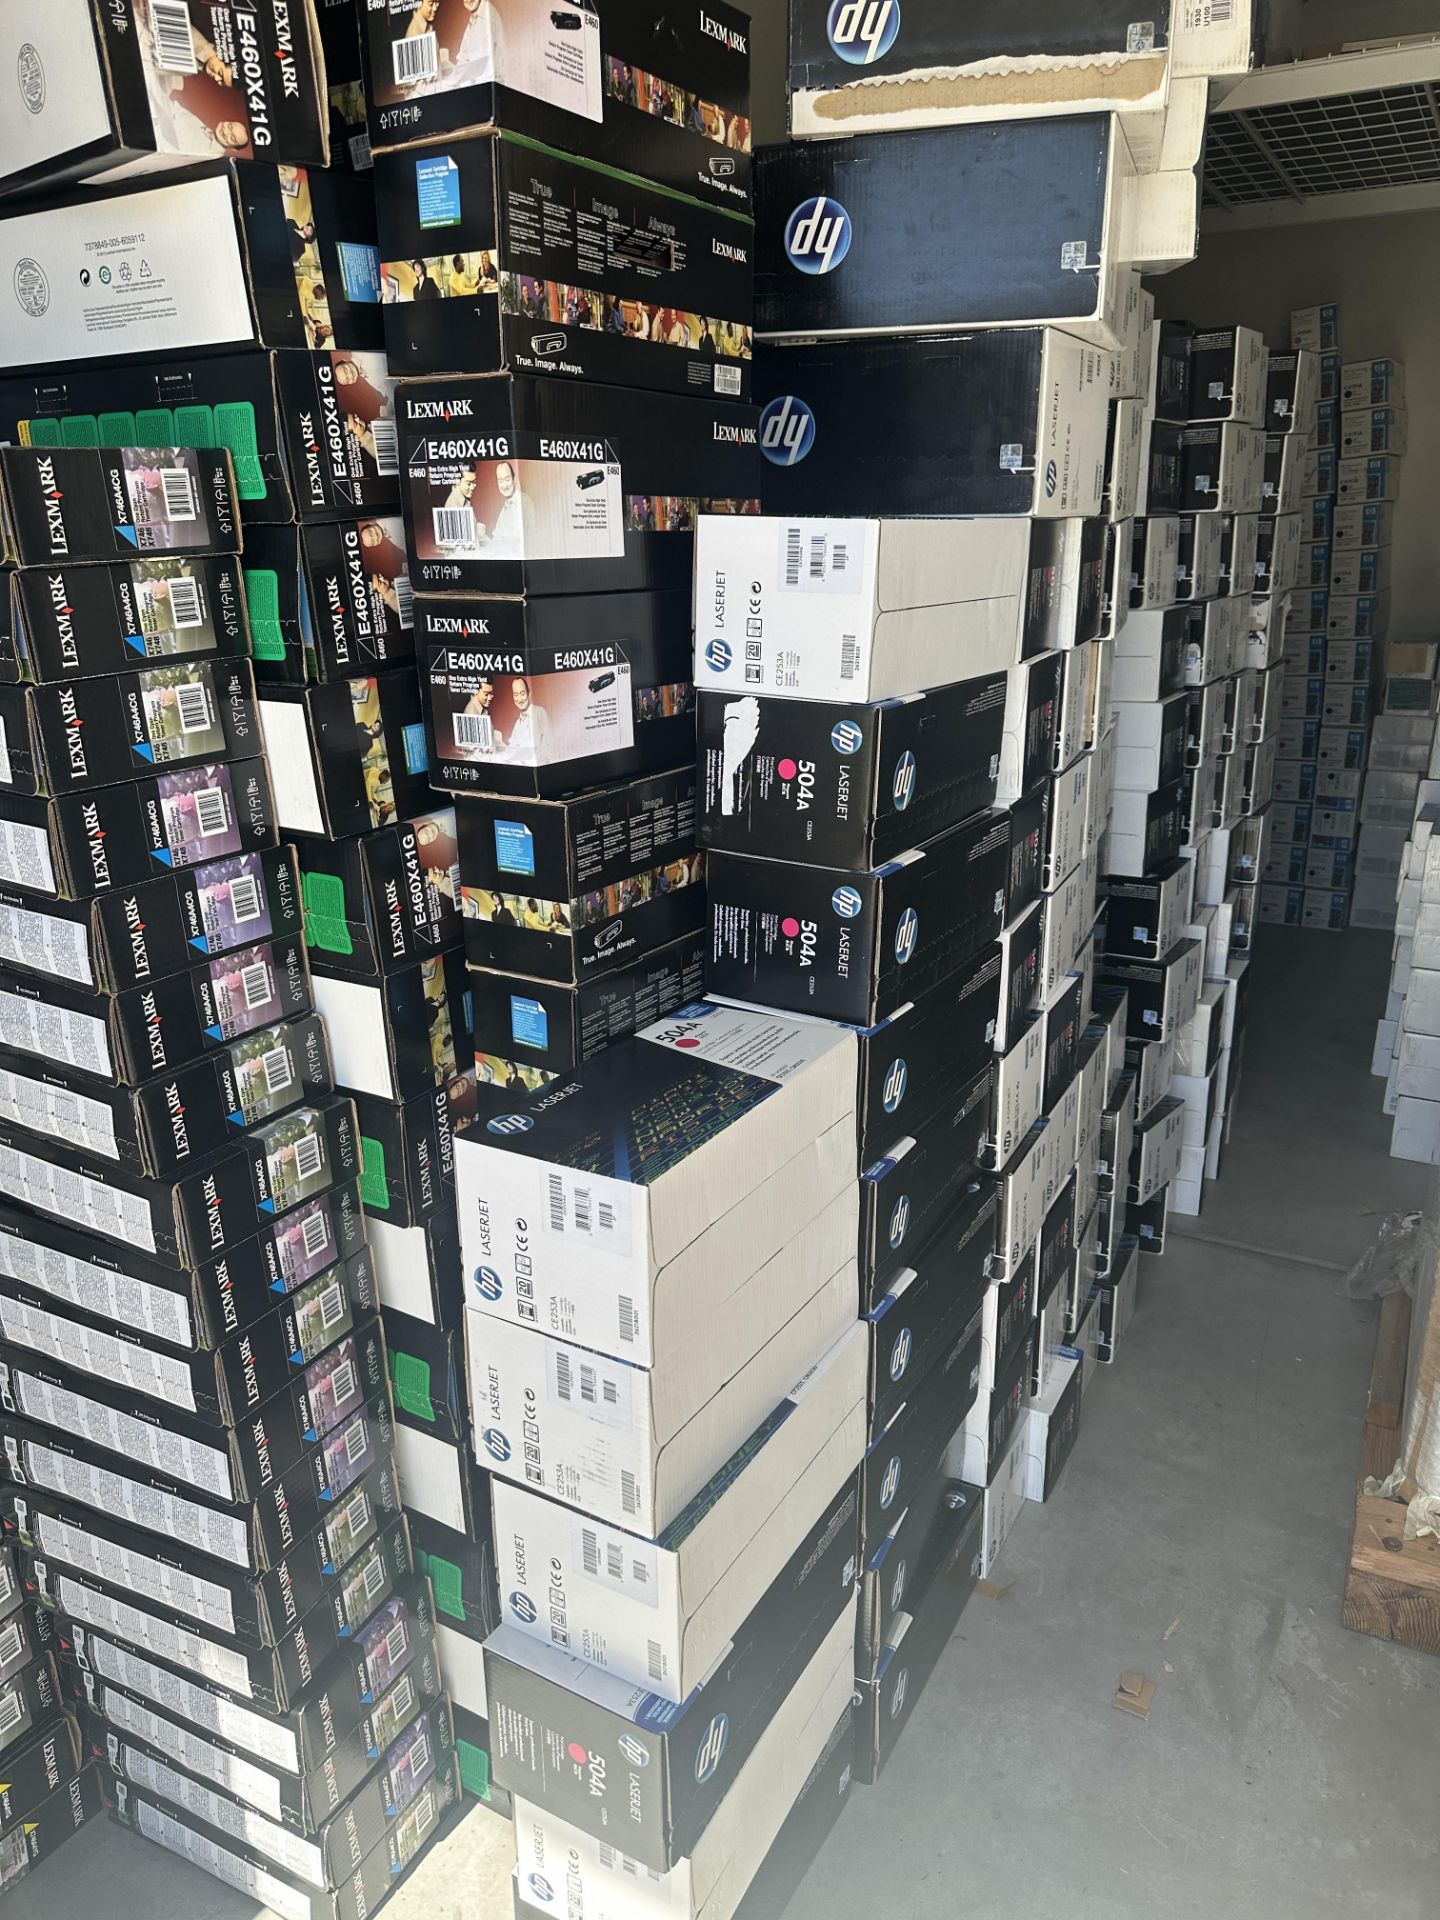 APPROX. 15 PALLETS OF TONER , XEROX, HP, LEXMARK + MANY MORE